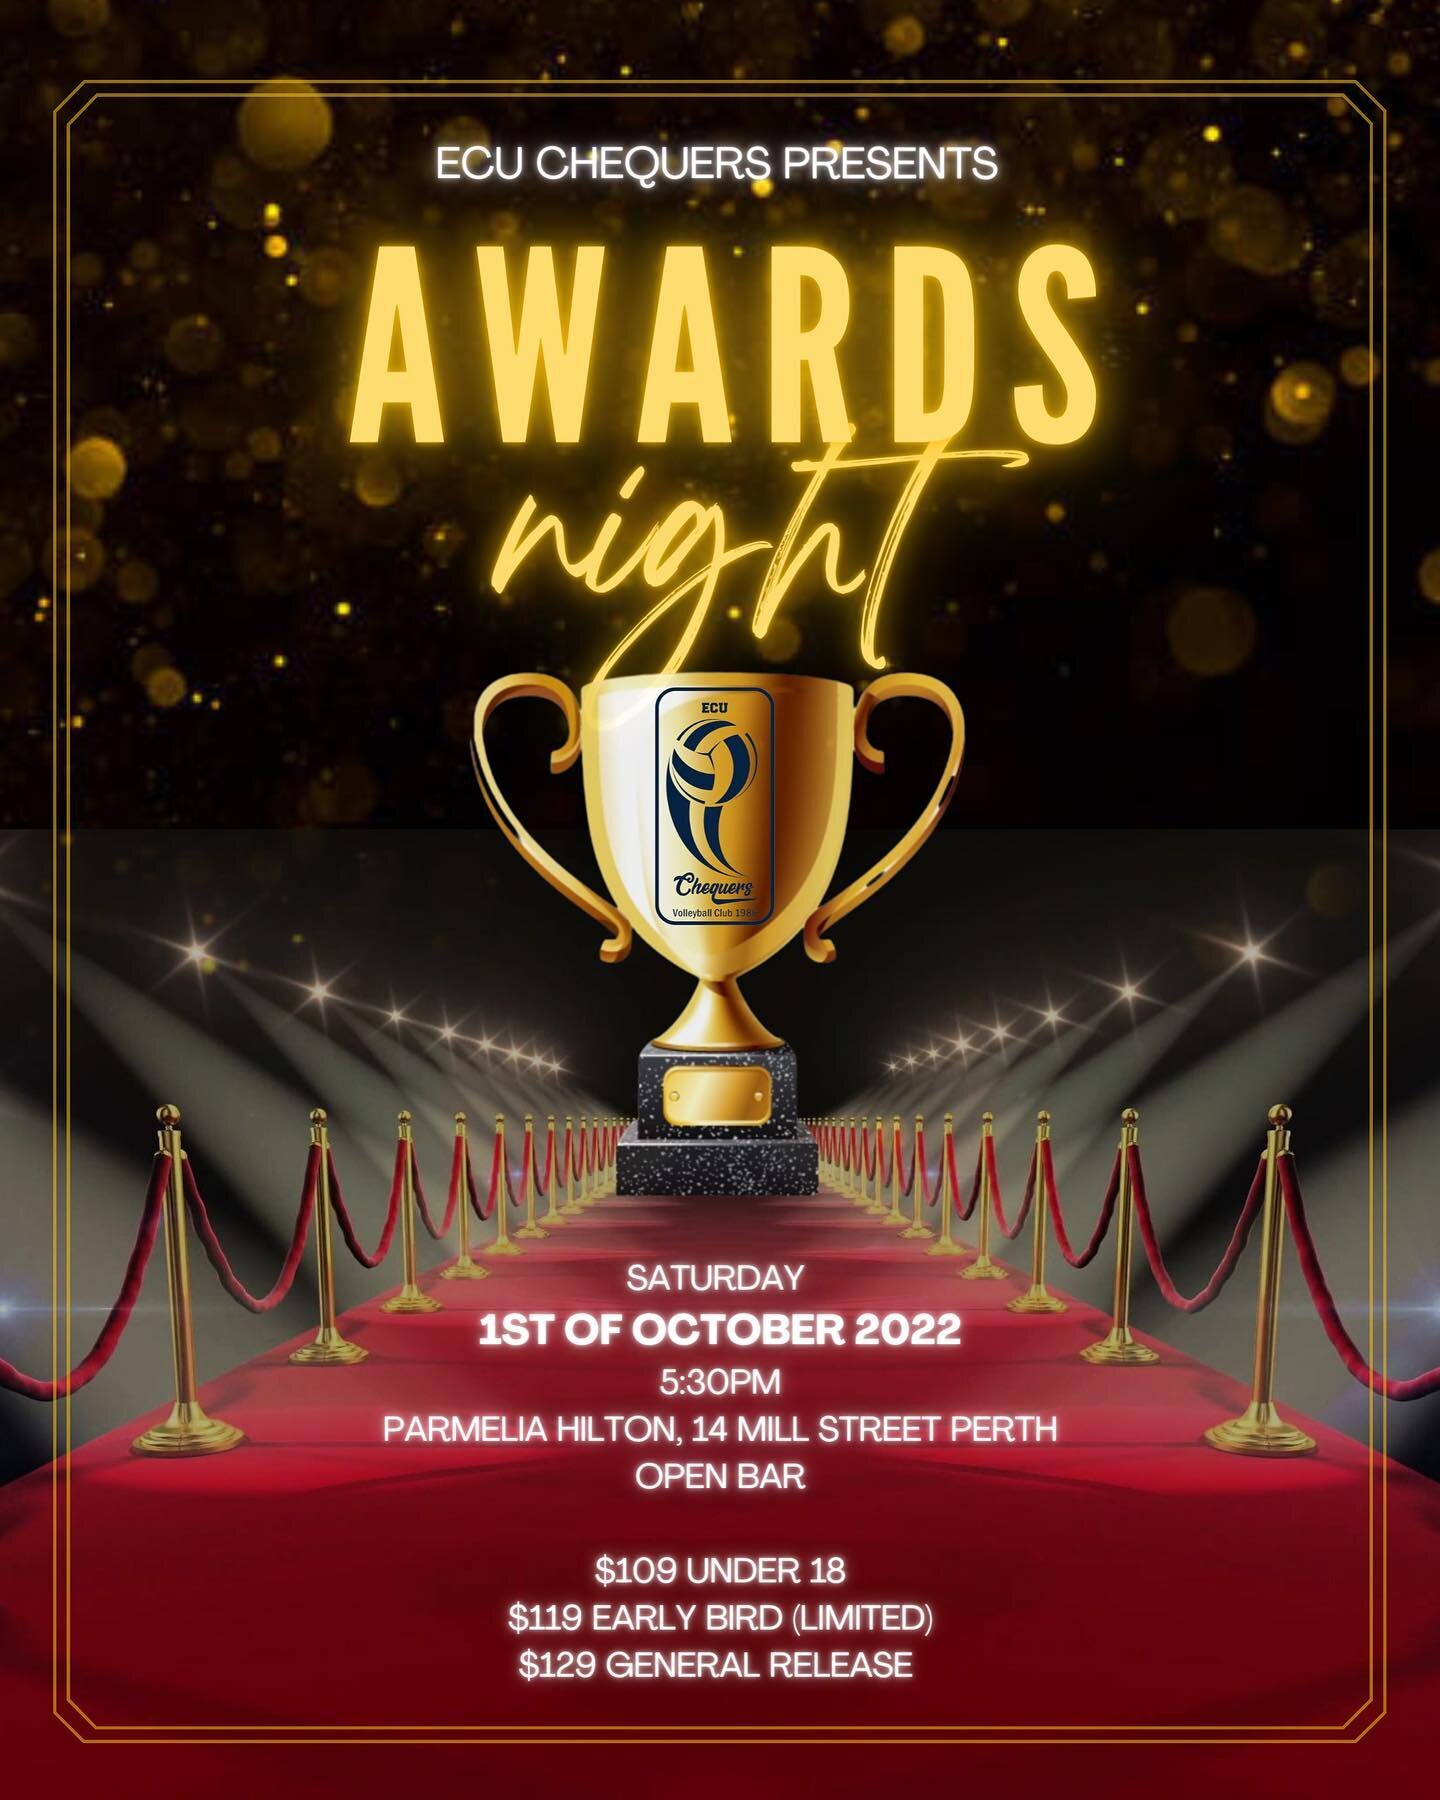 🏆 AWARDS NIGHT 🏆

ECU Chequers would like to invite you to the Awards Night!

Join us for a night of delicious food and OPEN BAR (unlimited drinks)! Not to mention, the announcement of each team&rsquo;s awards!

Snap some memories with our photo bo